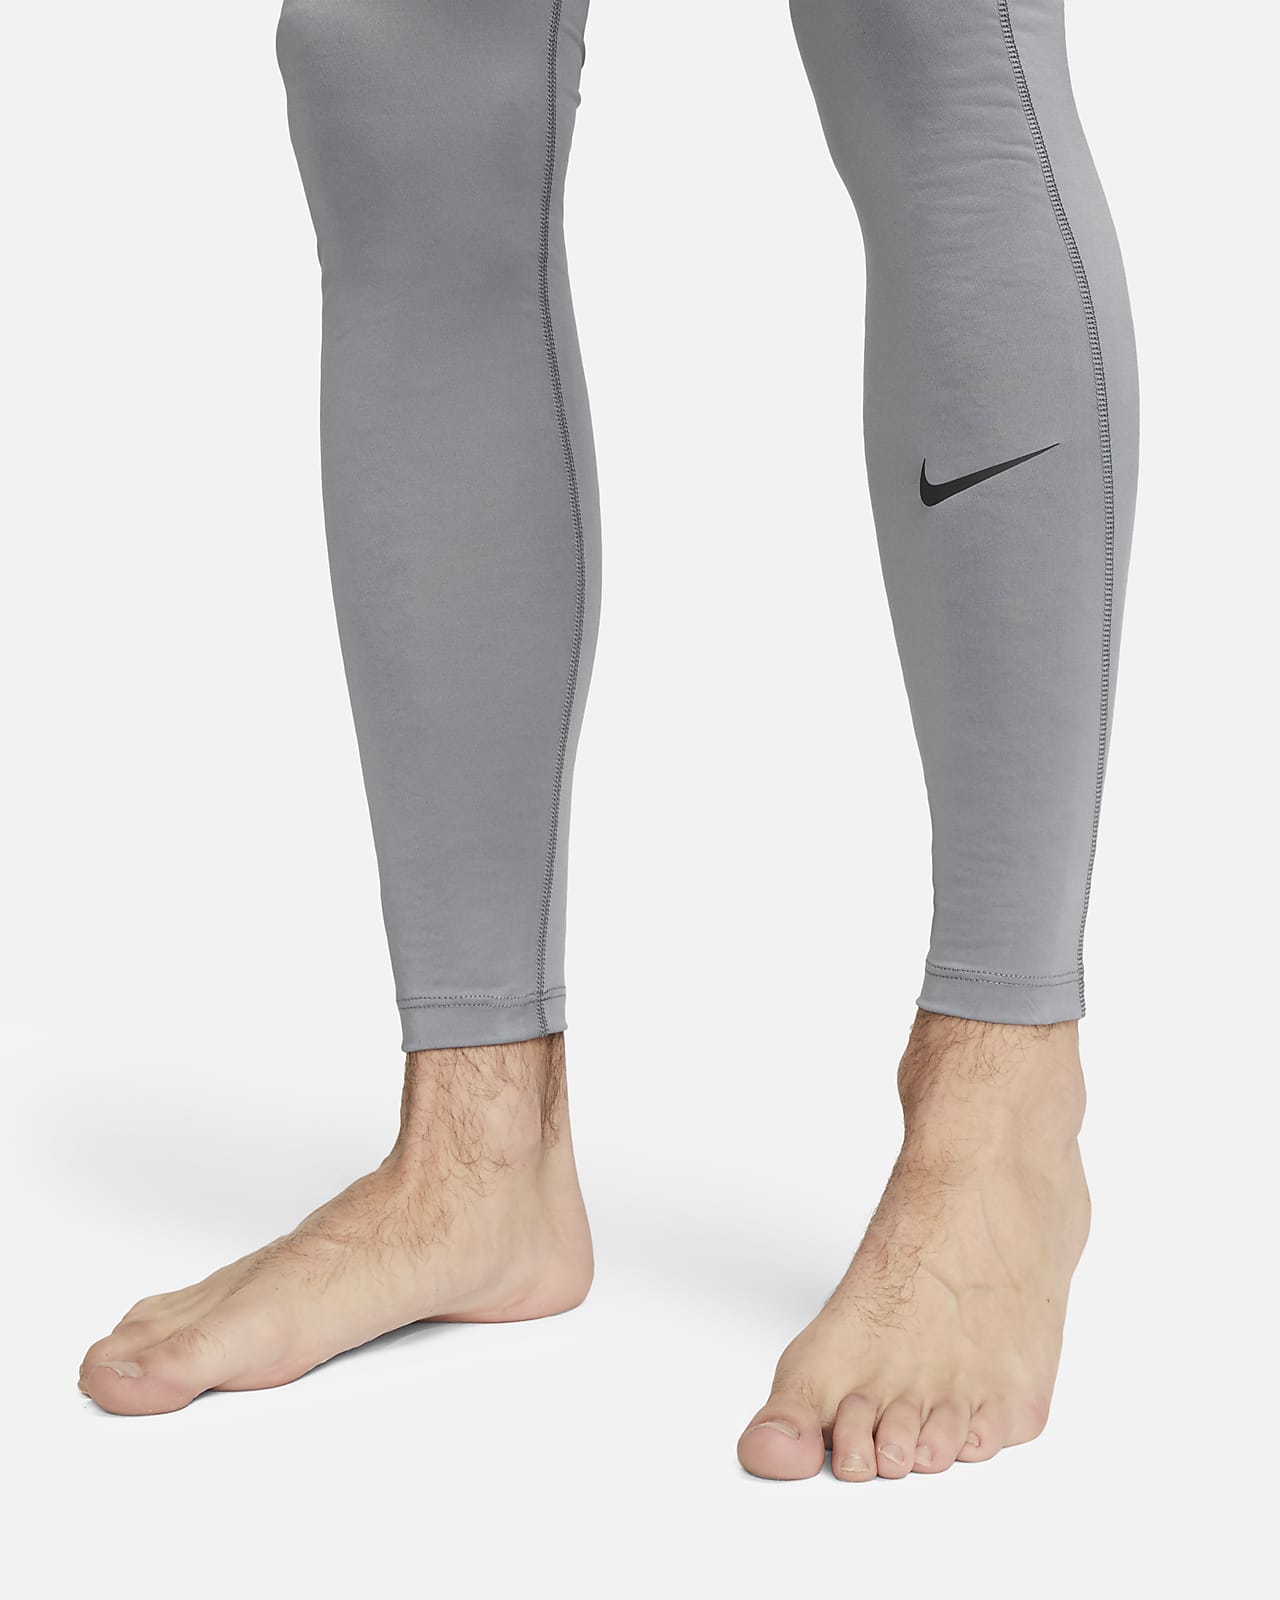 Nike Men's Pro Therma Compression Tights 